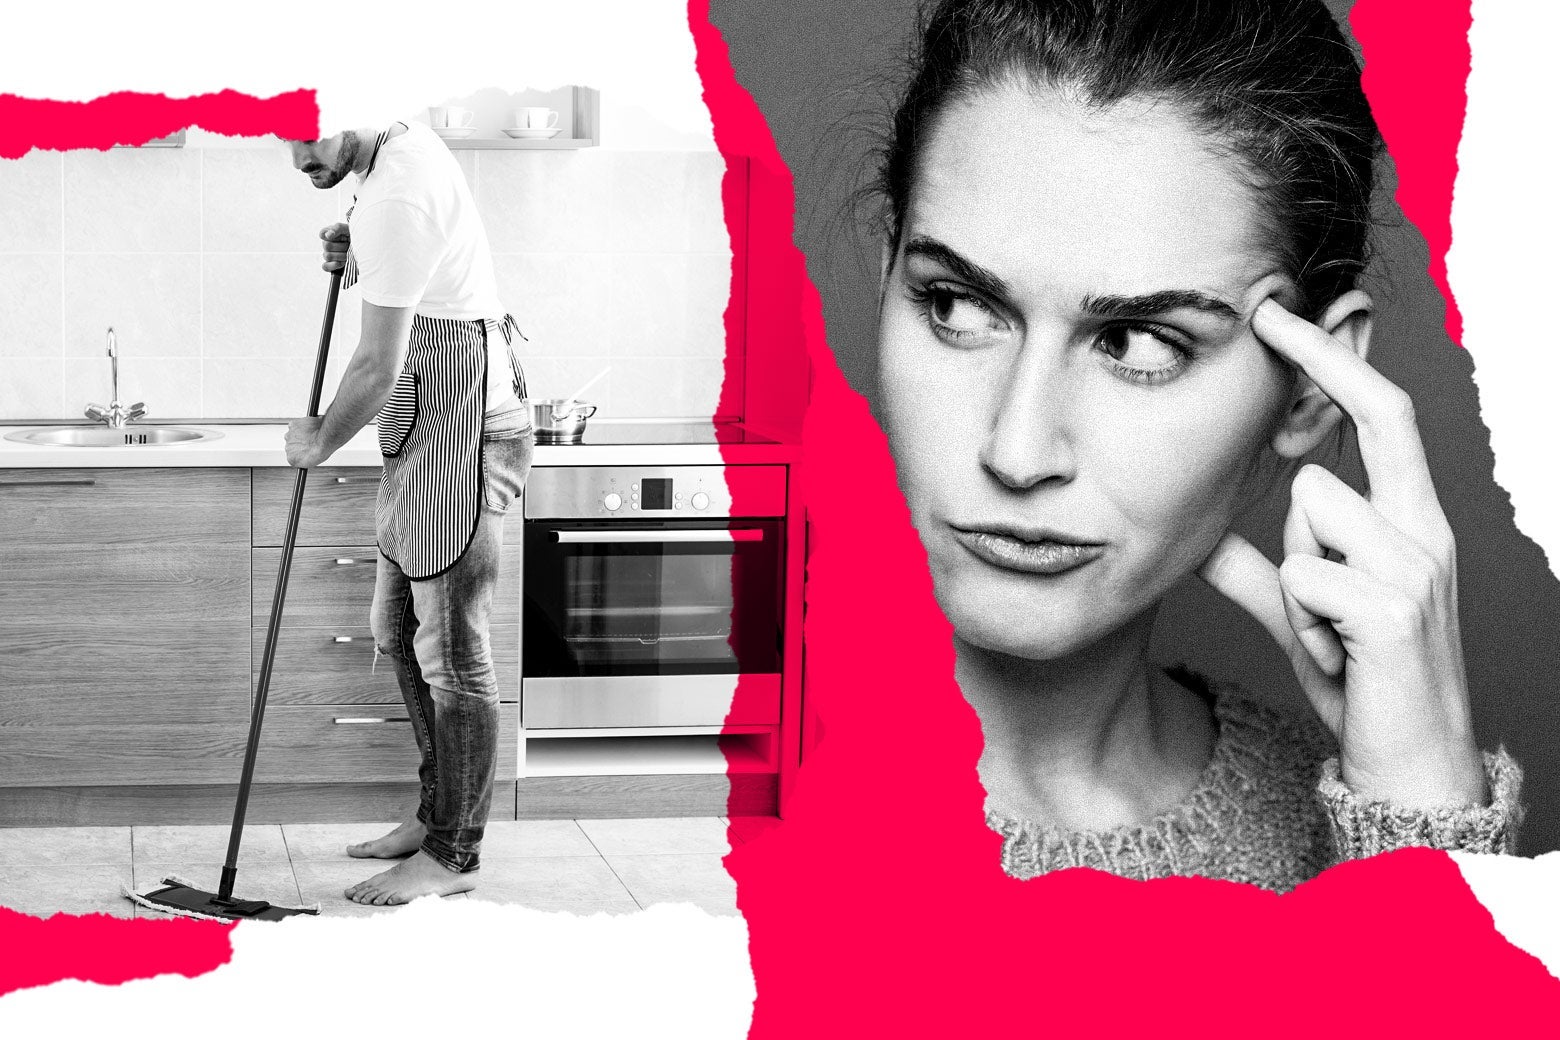 A man mops the kitchen floor. A woman looks annoyed.